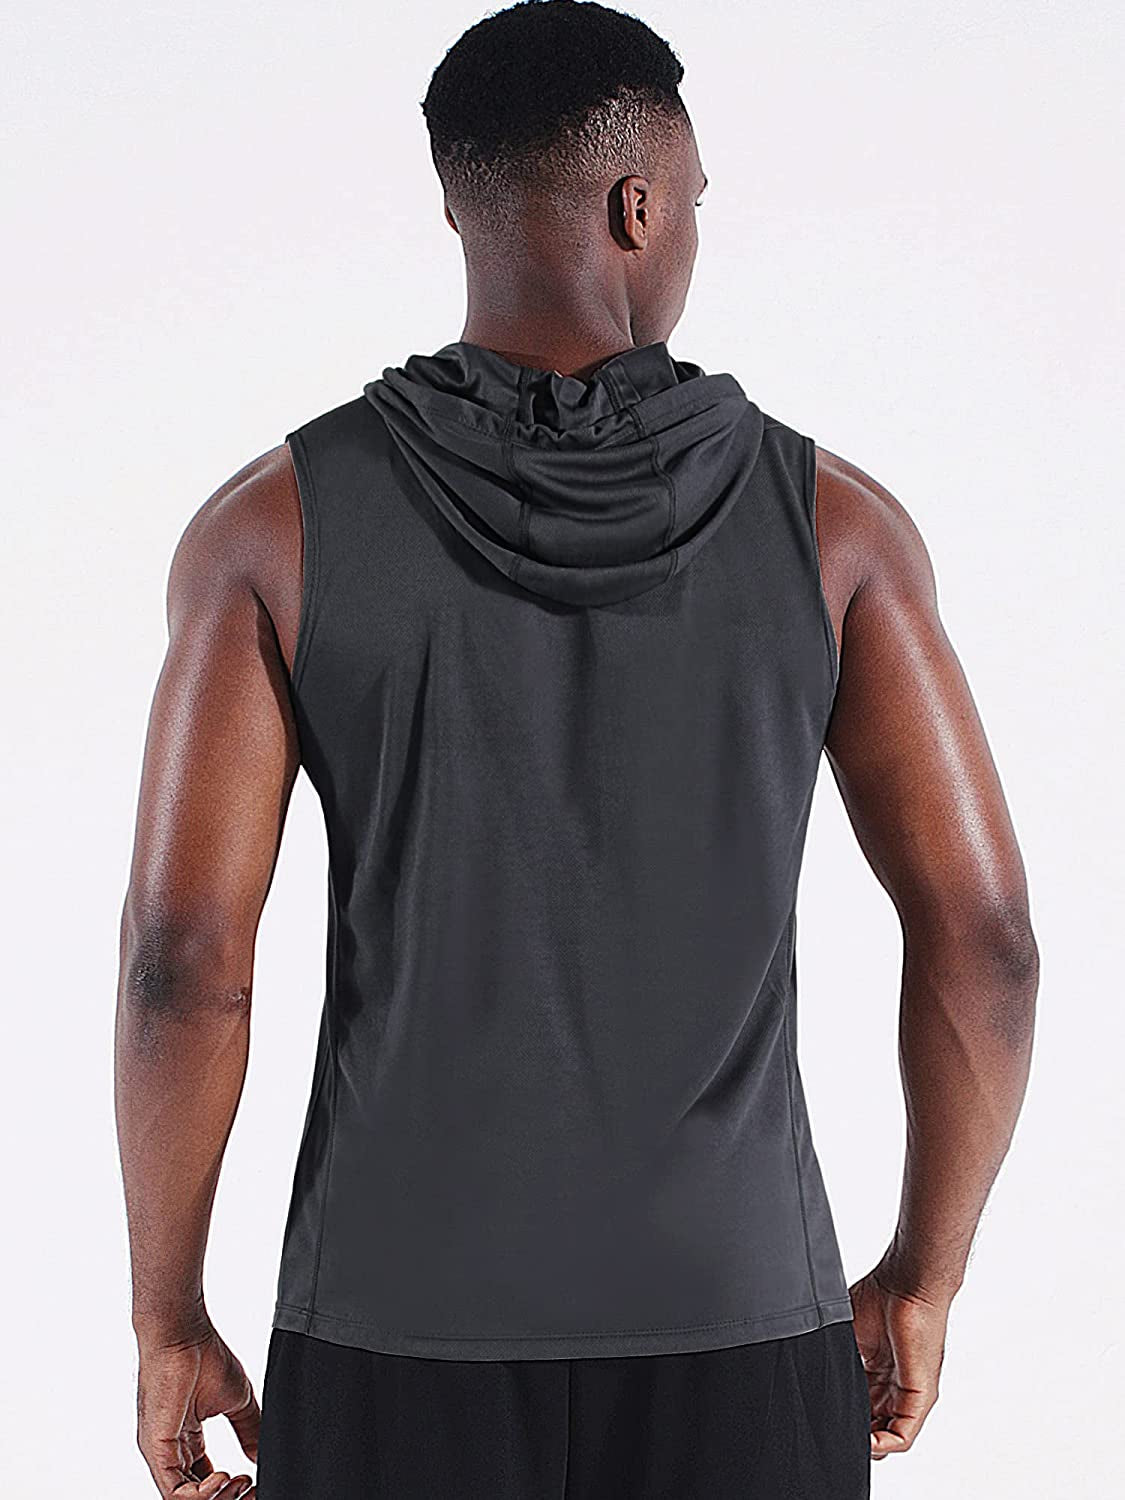 Men'S Workout Tank Tops 3 Pack Sleeveless Running Shirts with Hoodie